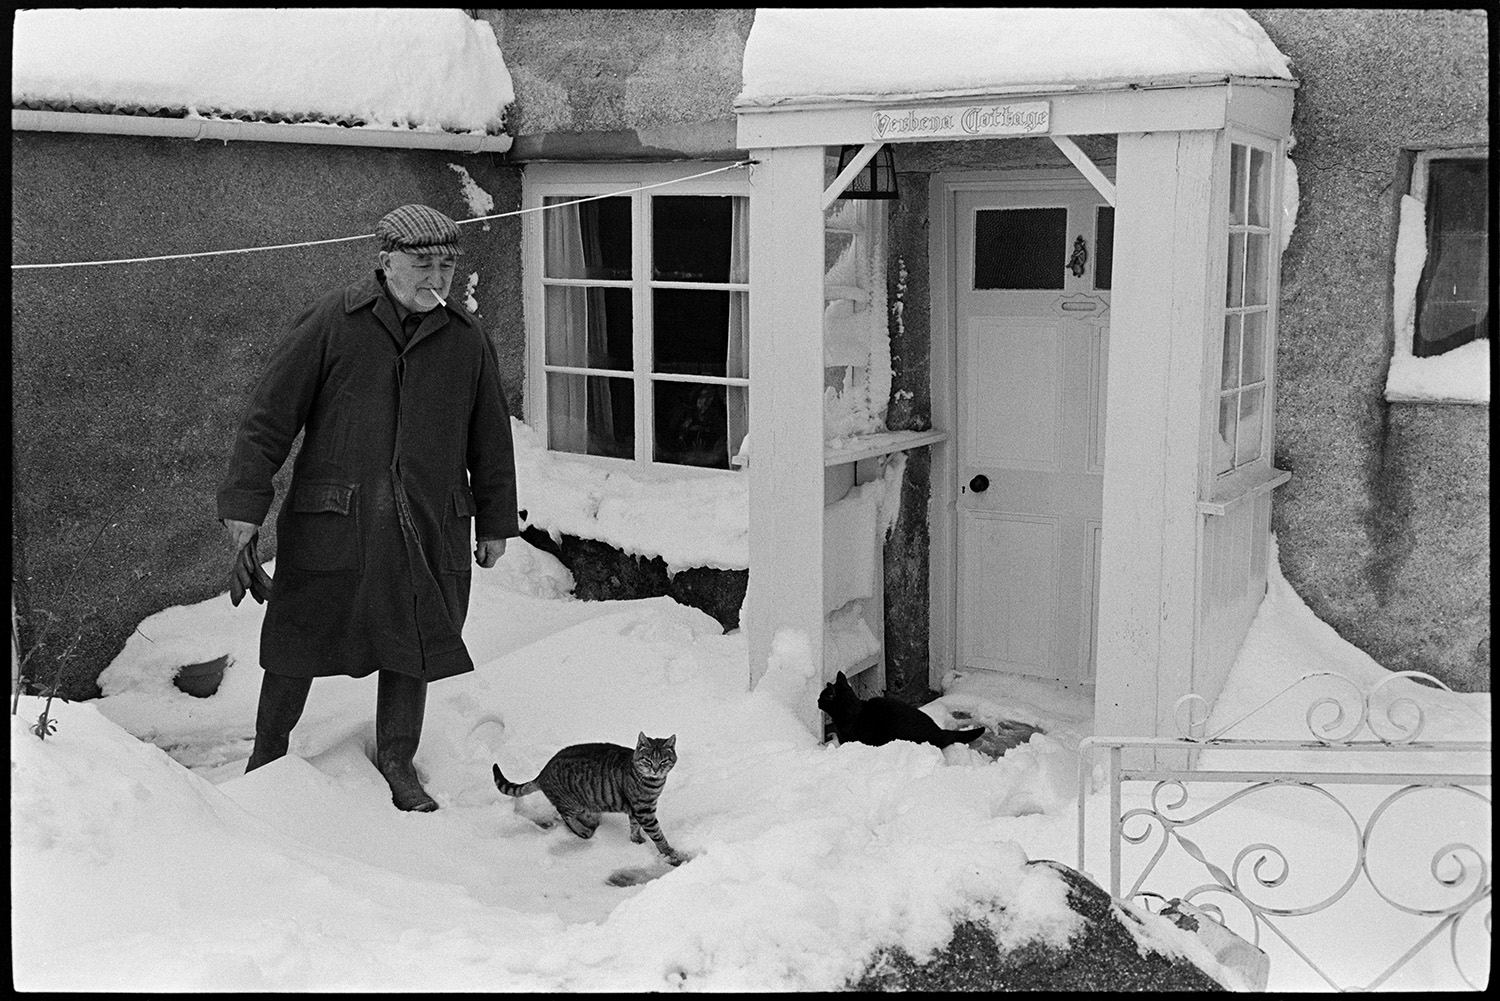 Snow, snowdrifts in village after blizzard, cars, people shovelling, telephone kiosk. 
[Alf Folland and a cat in the snow, outside Verbena Cottage, Dolton.]